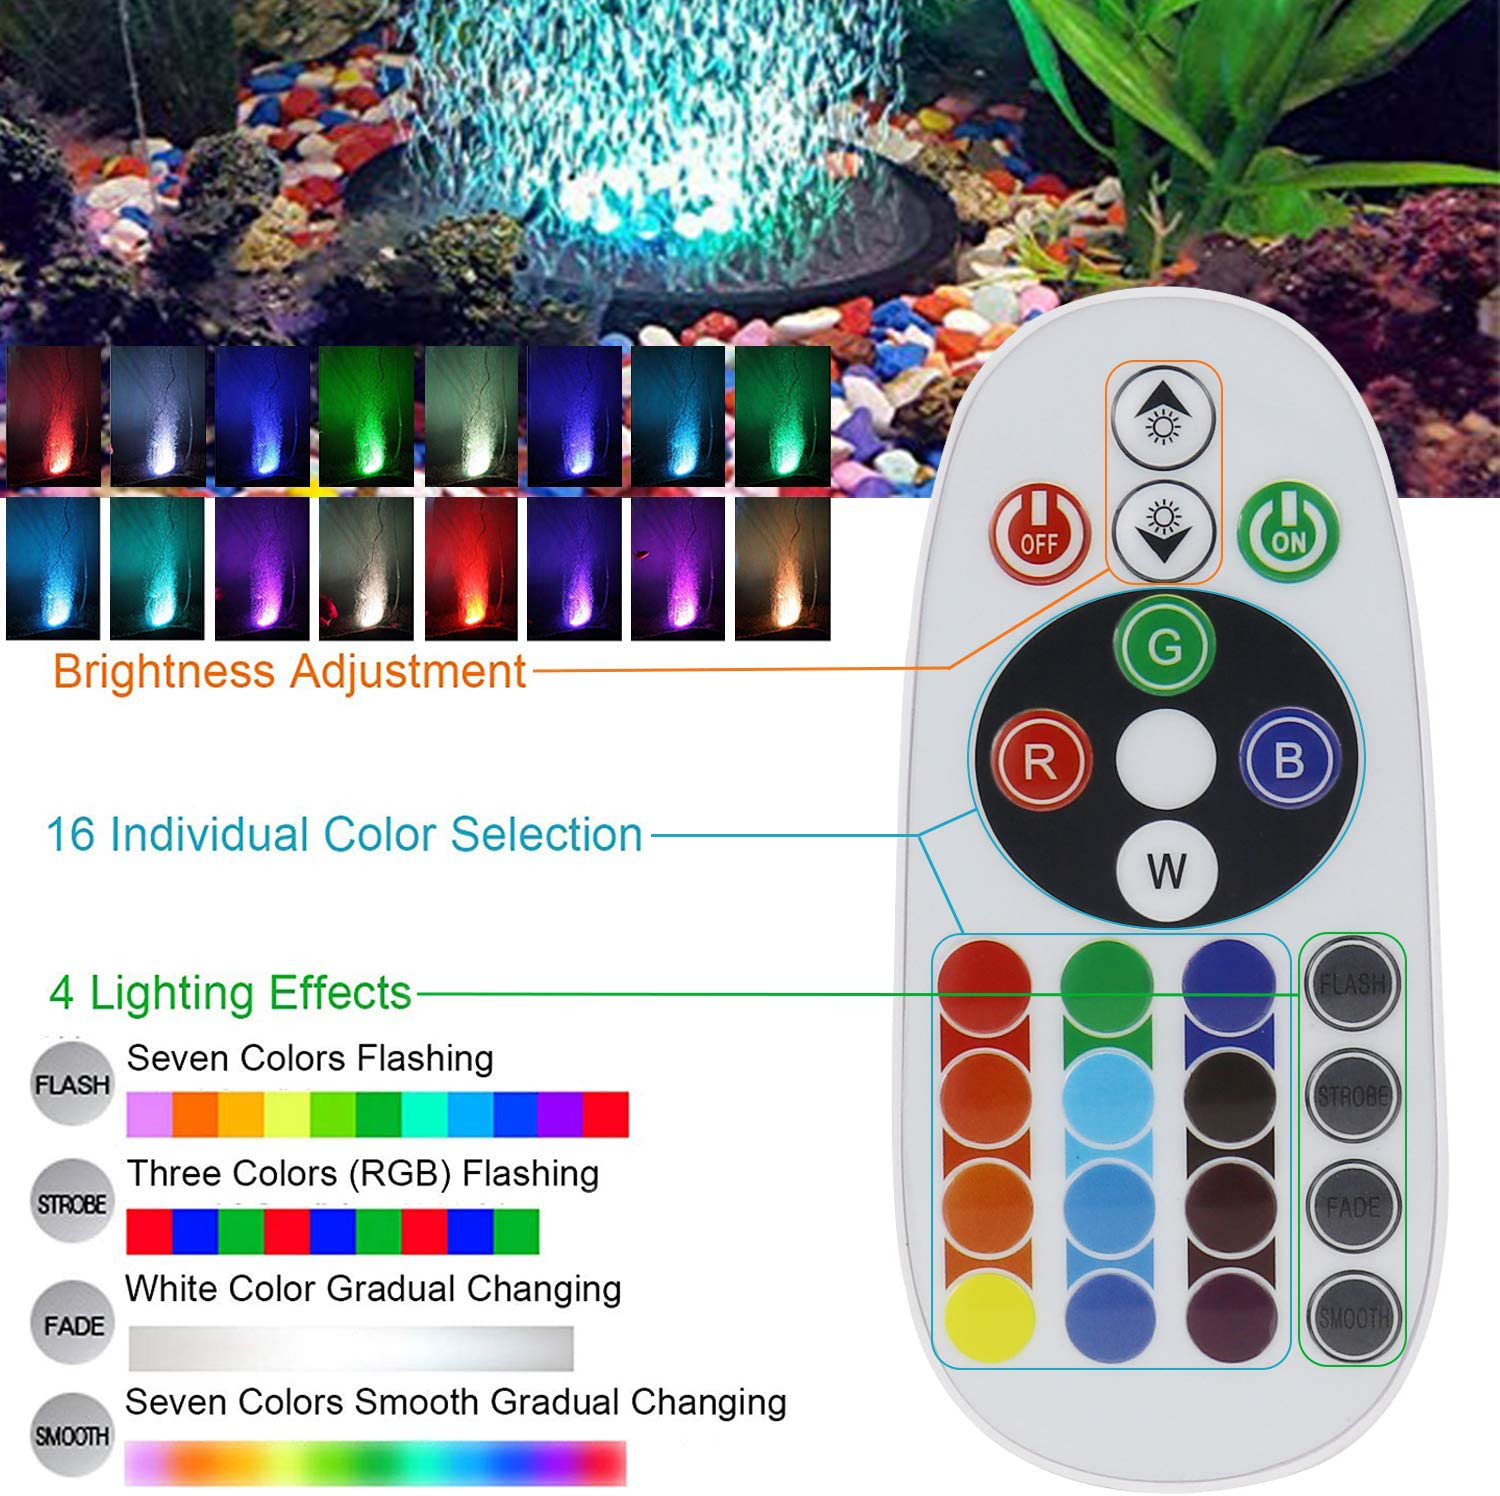 Aquarium Bubble LED Lights RGBW, TOPBRY Remote Controlled Air Stone Disk, with 16 Color Changing, 4 Lighting Effects for Fish Tank Decorations